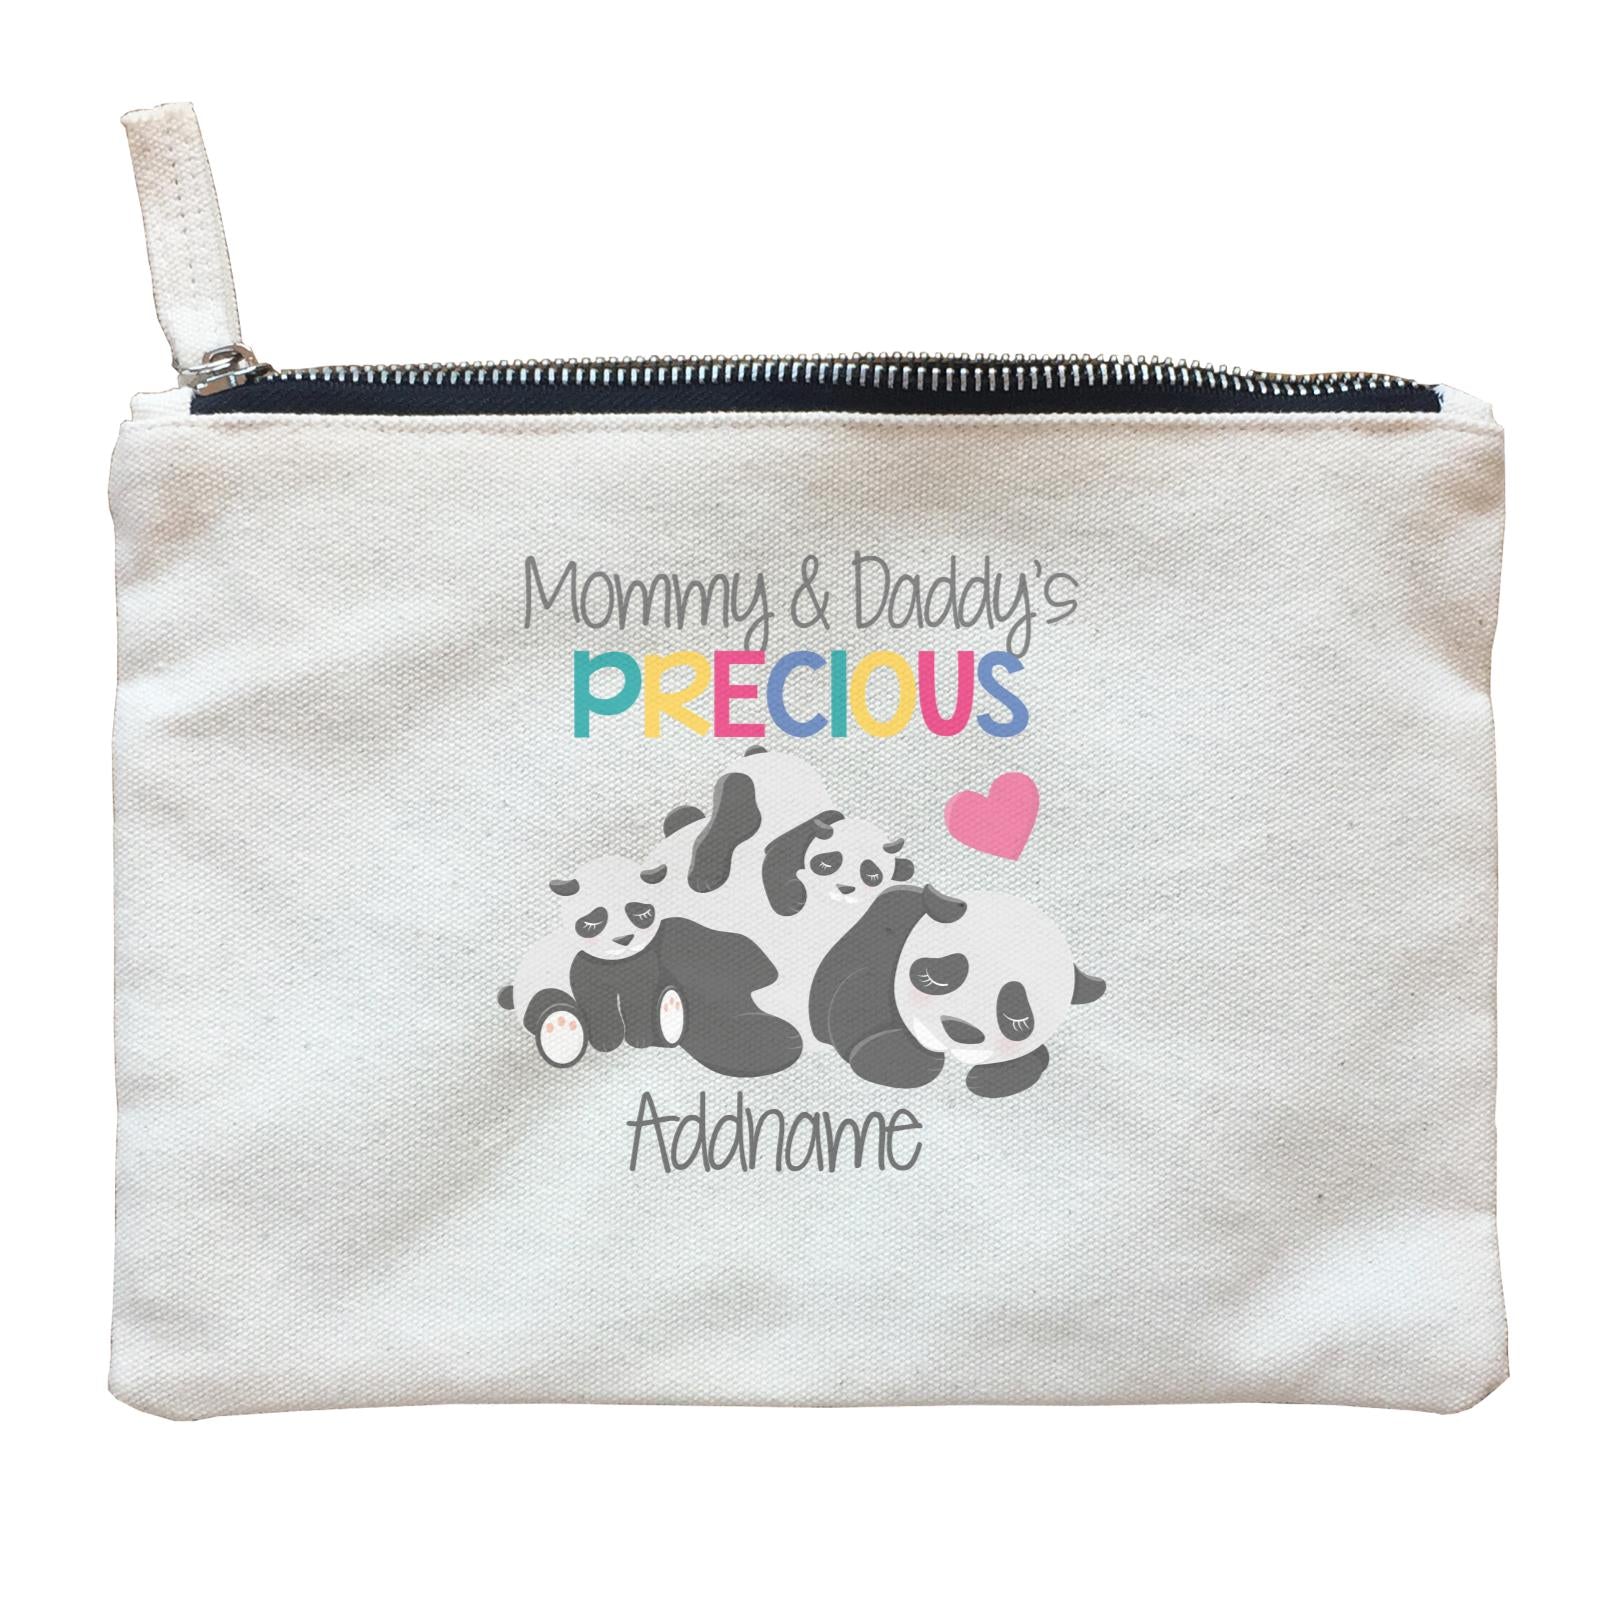 Animal & Loved Ones Mommy & Daddy's Precious Panda Family Addname Zipper Pouch